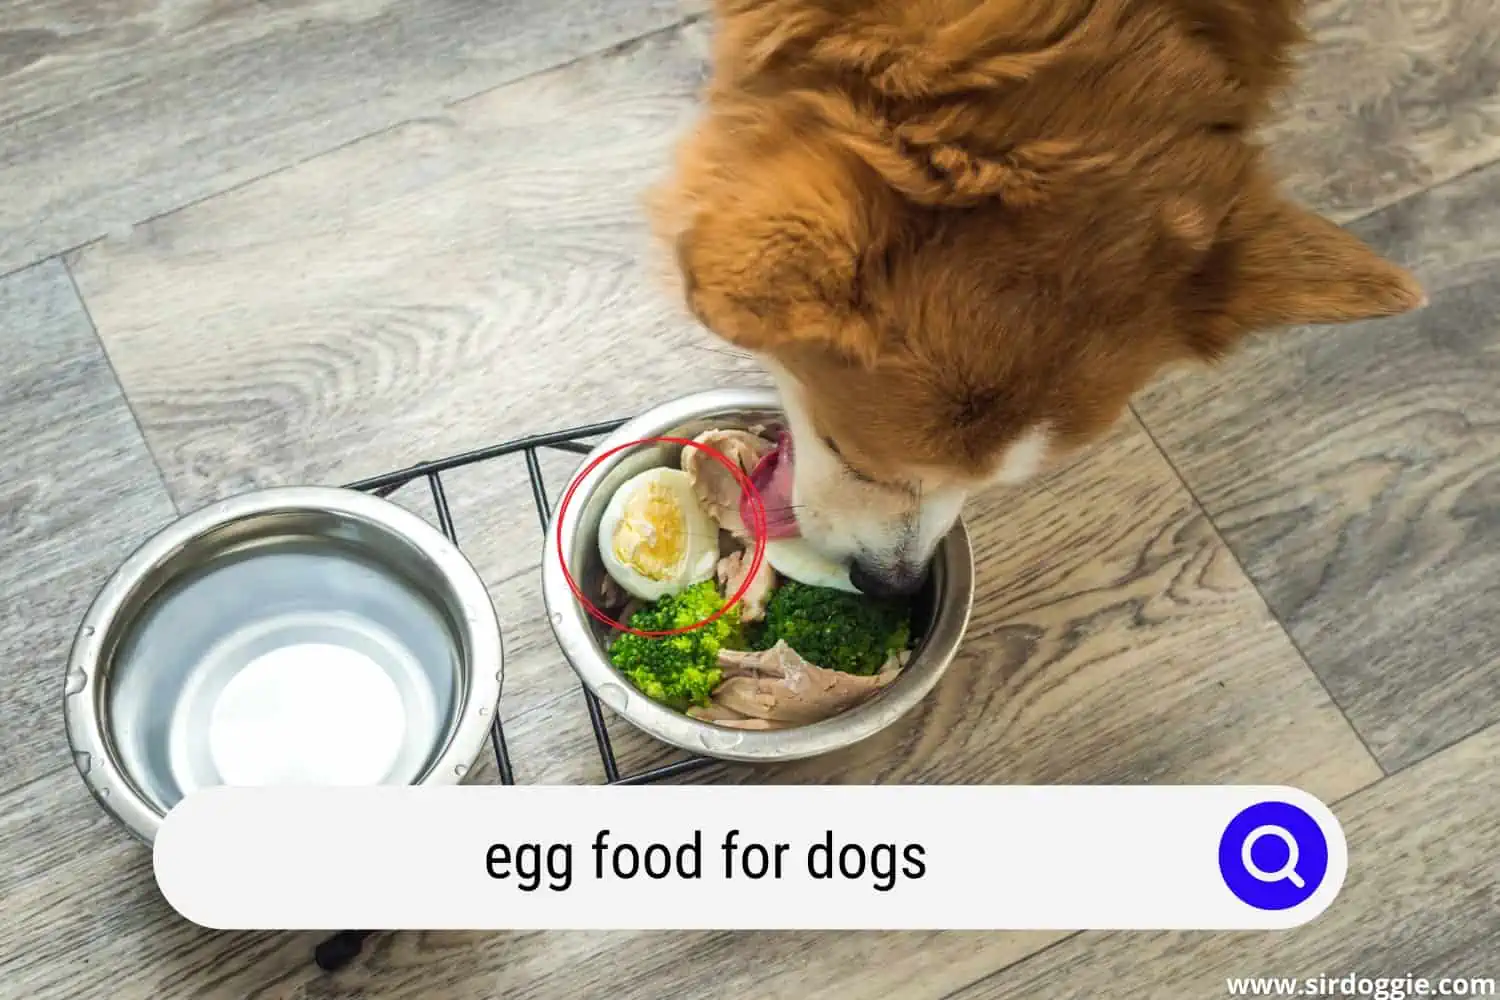 Dog eating mixed food in a bowl with egg